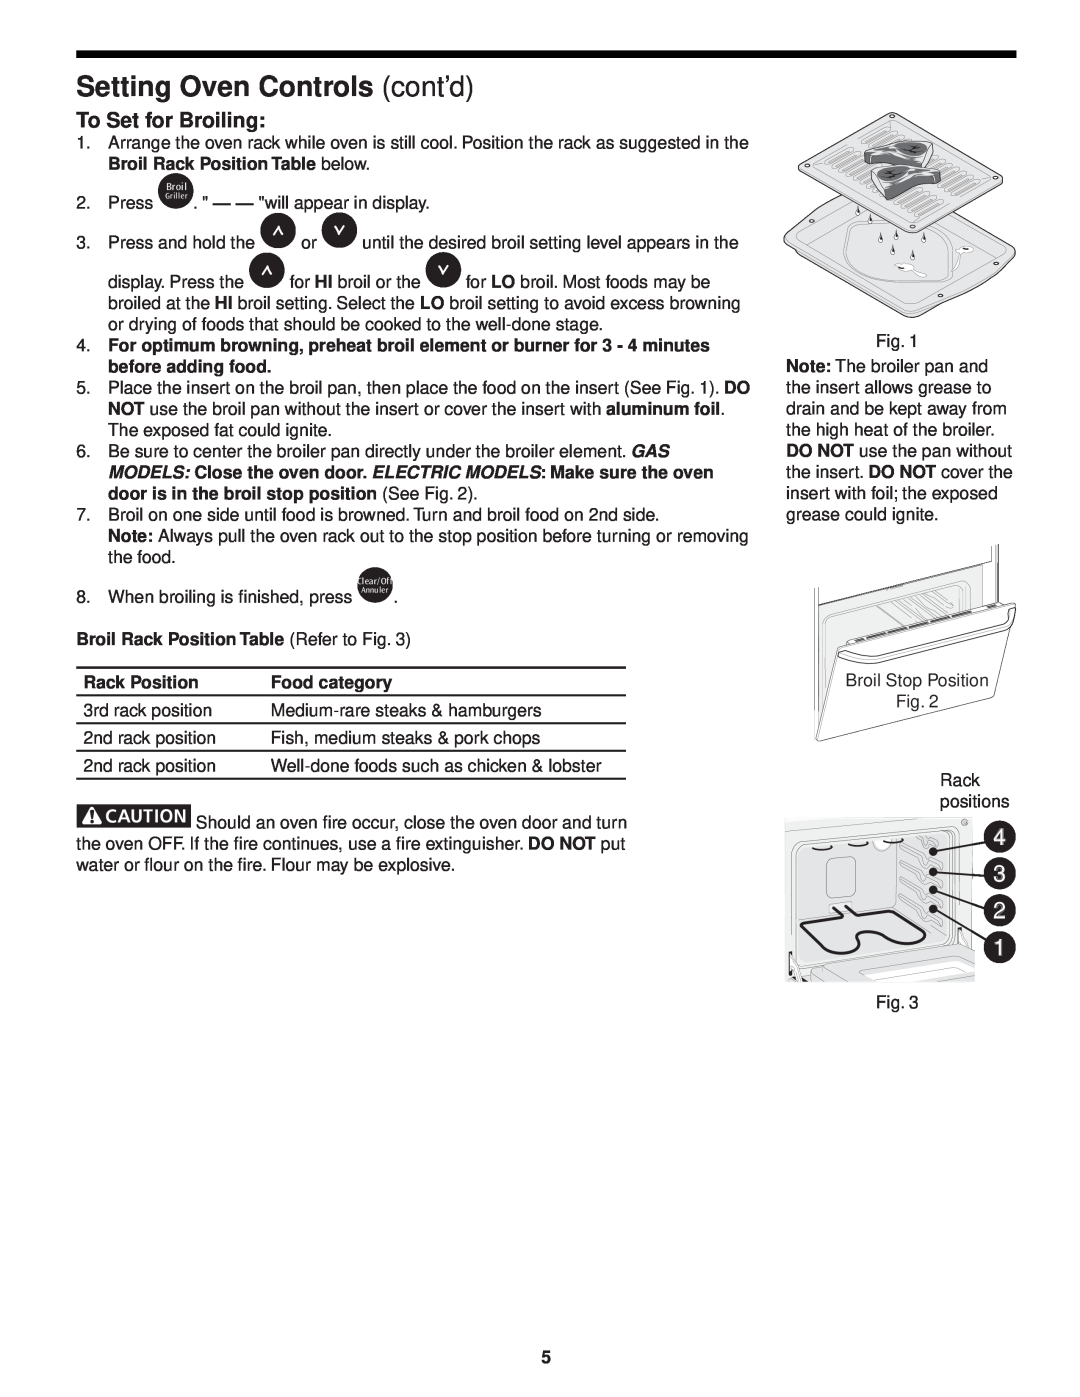 Frigidaire CFES365EC, 318200183 (0903) manual To Set for Broiling, Broil Rack Position Table Refer to Fig, Food category 